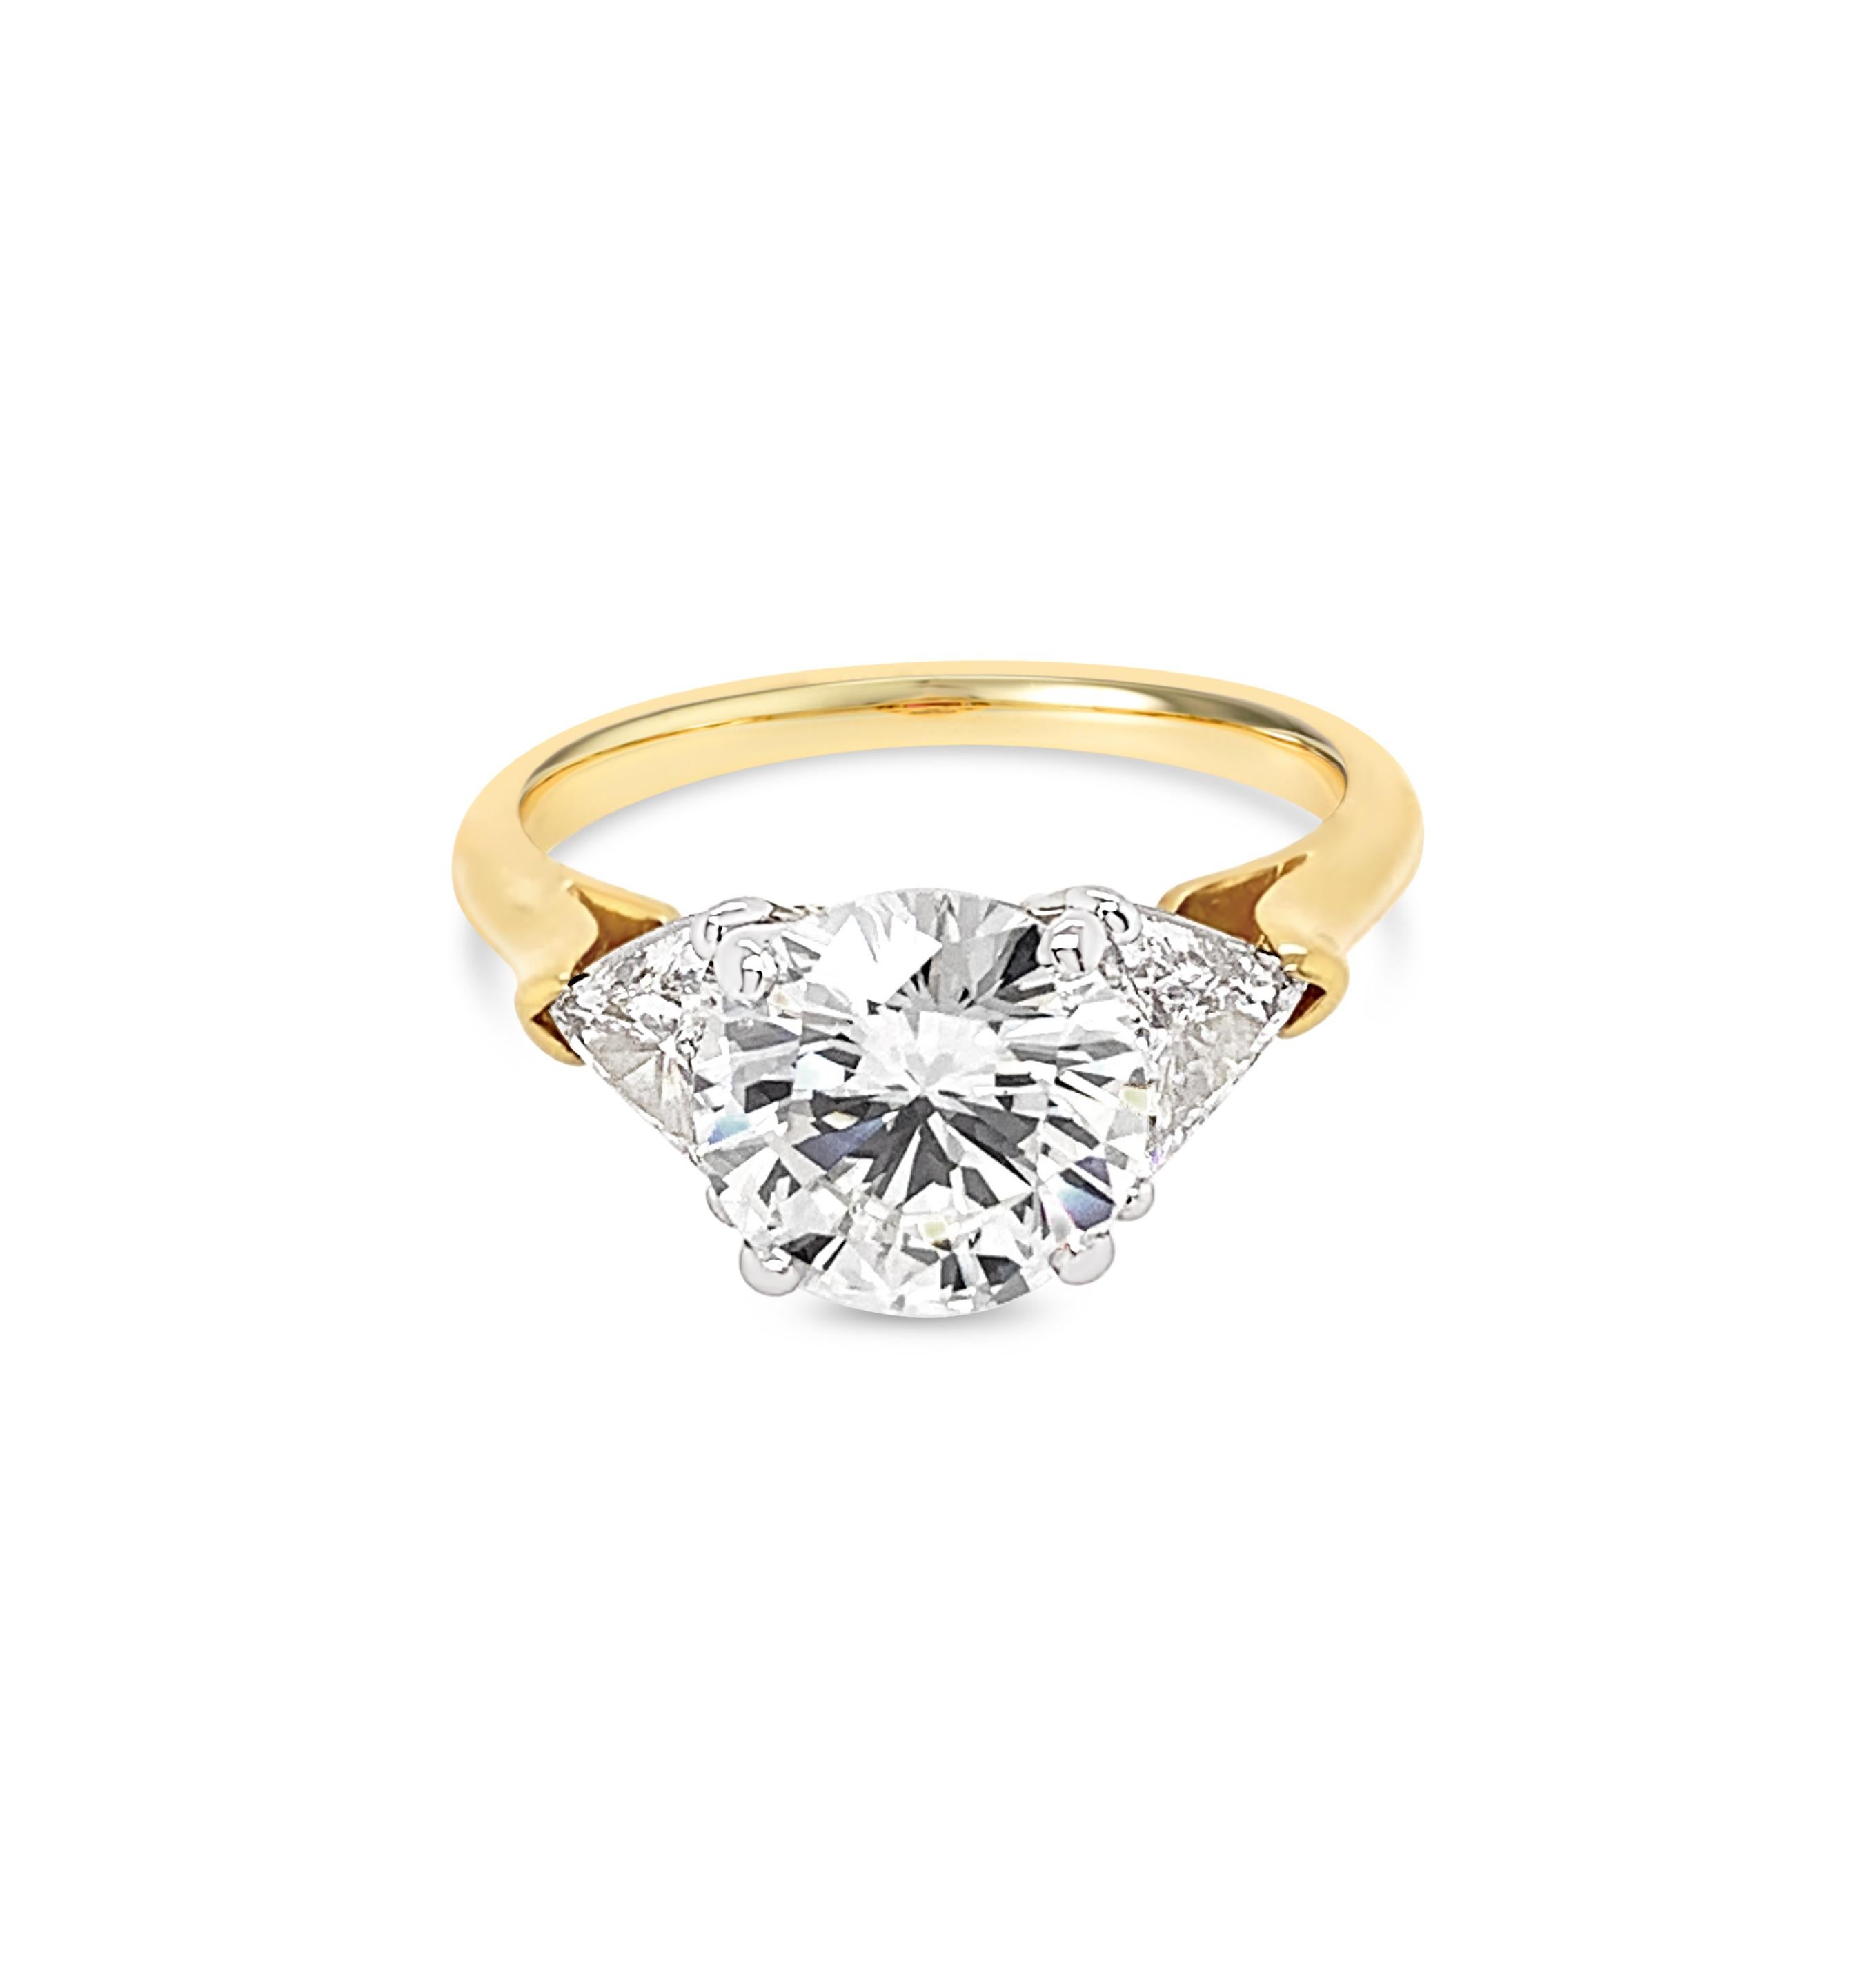 Beautiful 2.25 Carat Round Brilliant Cut Diamond Ring in 18K Yellow Gold with Platinum setting.  Center diamond color grade is G and clarity is VVS-2.  Side diamond trillions weigh 1.00 Carat (total weight).


